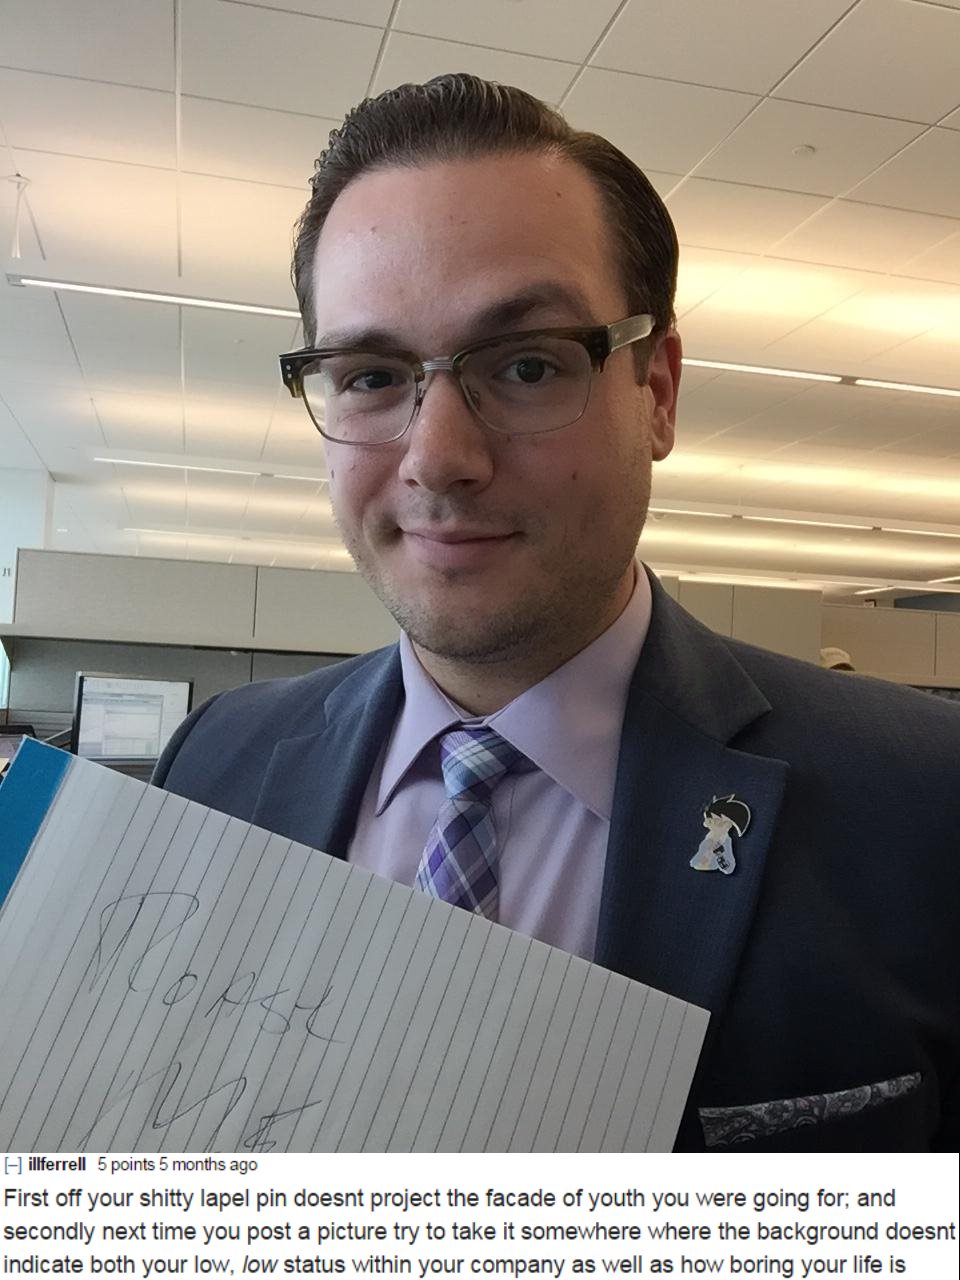 official - i illferrell 5 points 5 months ago First off your shitty lapel pin doesnt project the facade of youth you were going for; and secondly next time you post a picture try to take it somewhere where the background doesnt indicate both your low, low